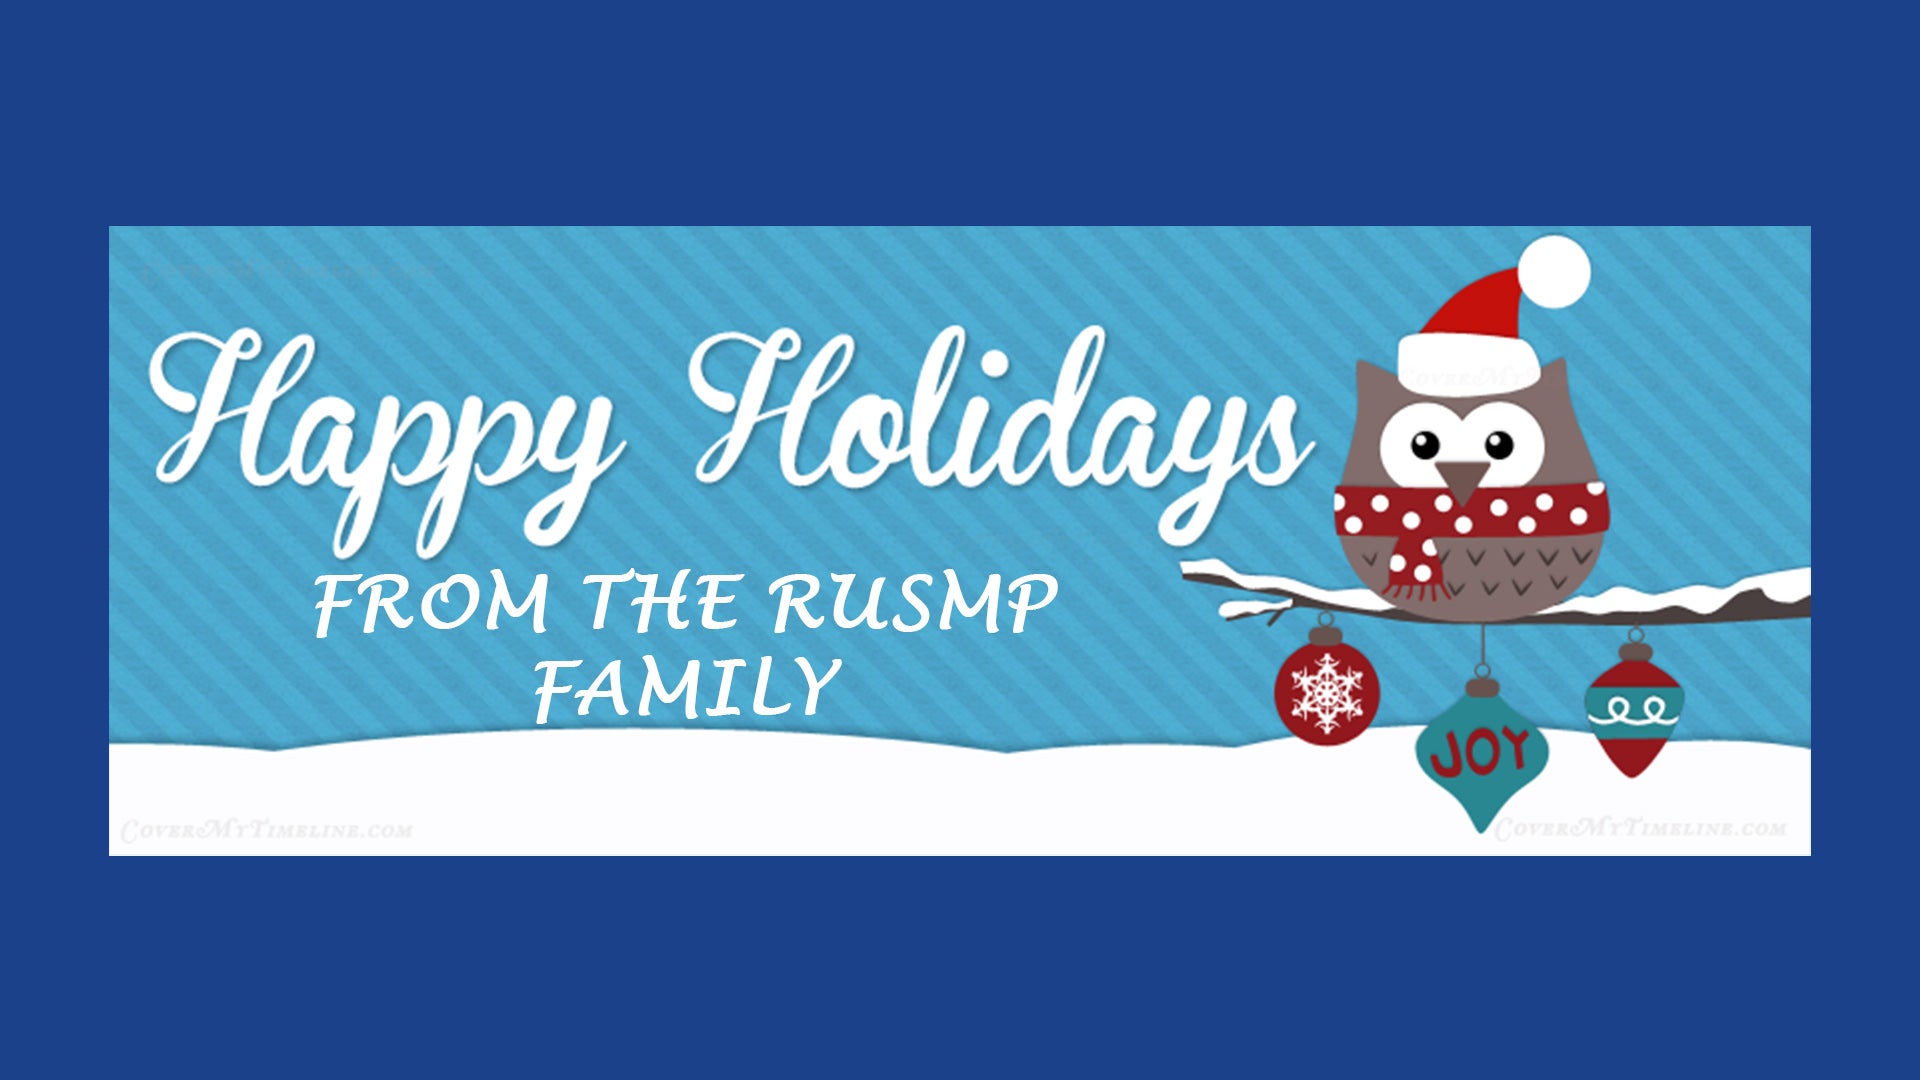 In the spirit of holiday giving, please consider RUSMP.